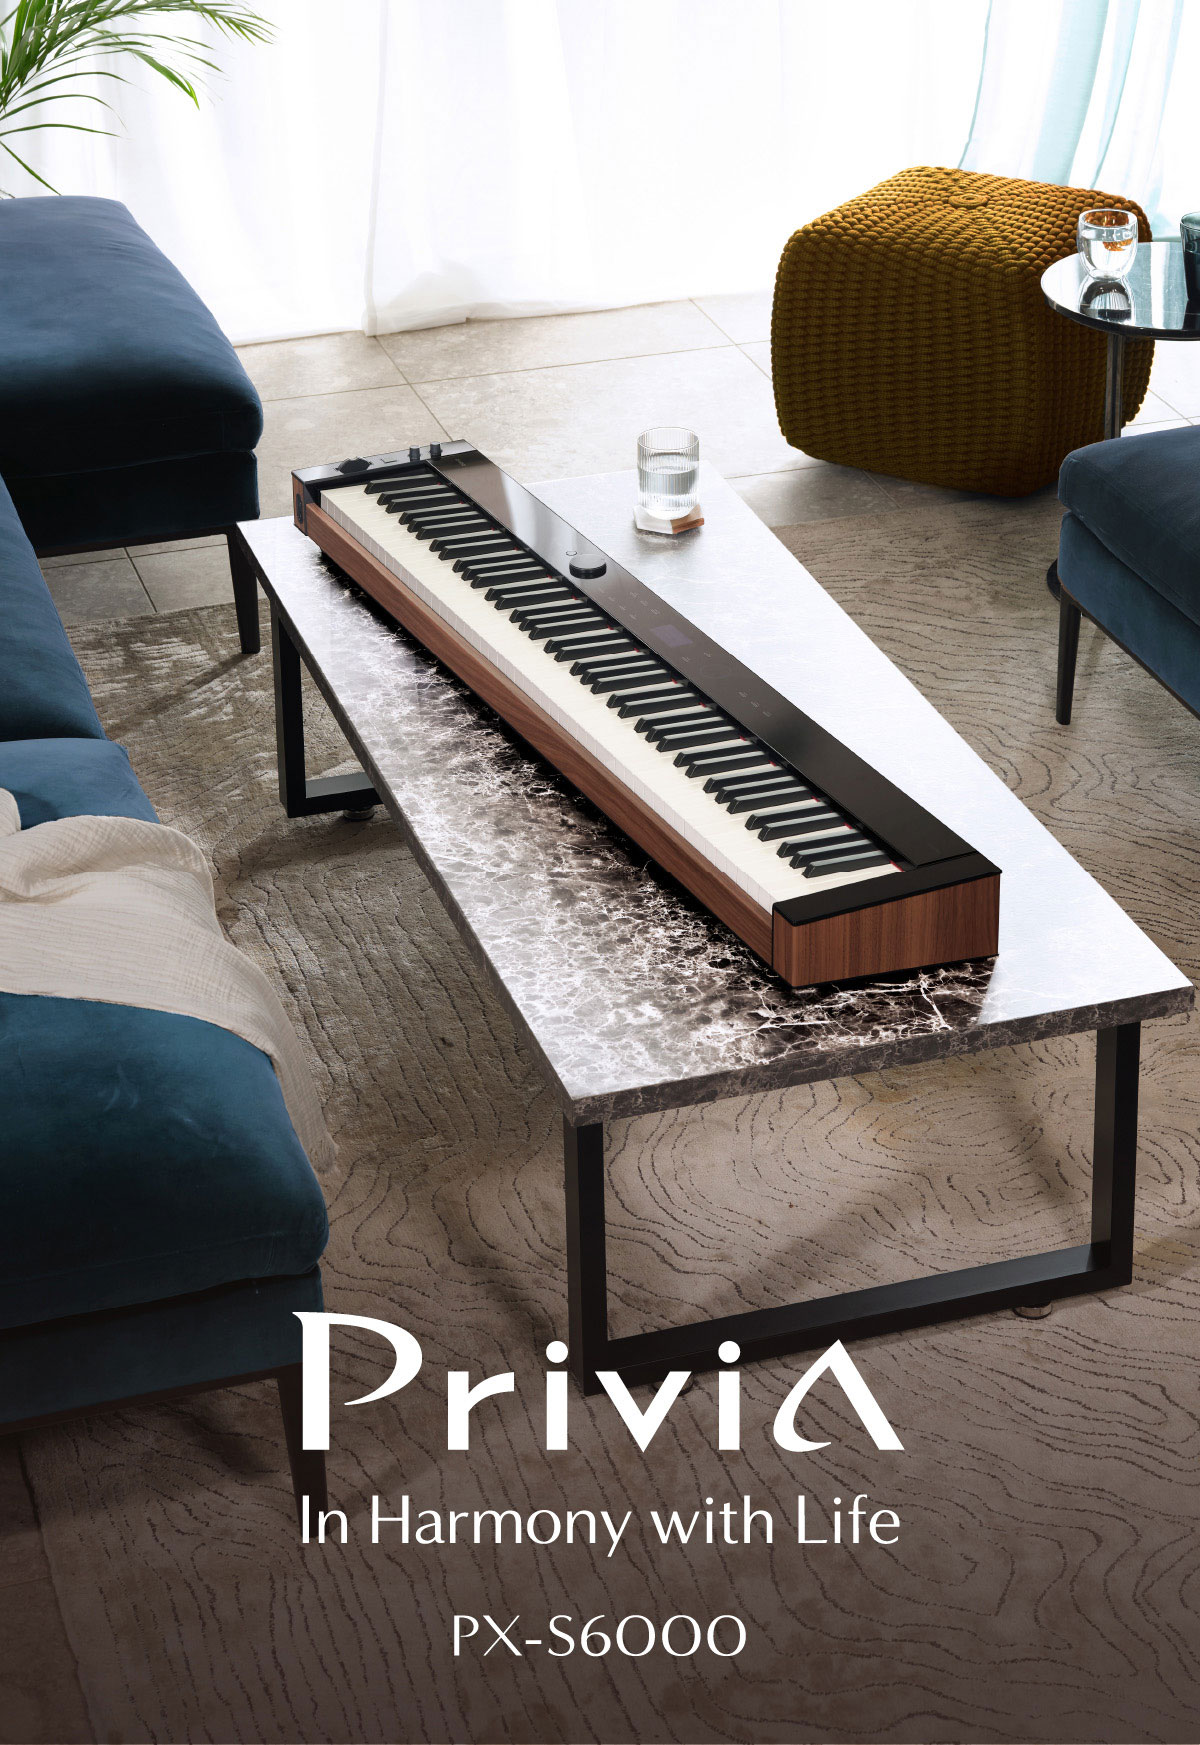 Privia, In Harmony with Life, PX-S6000